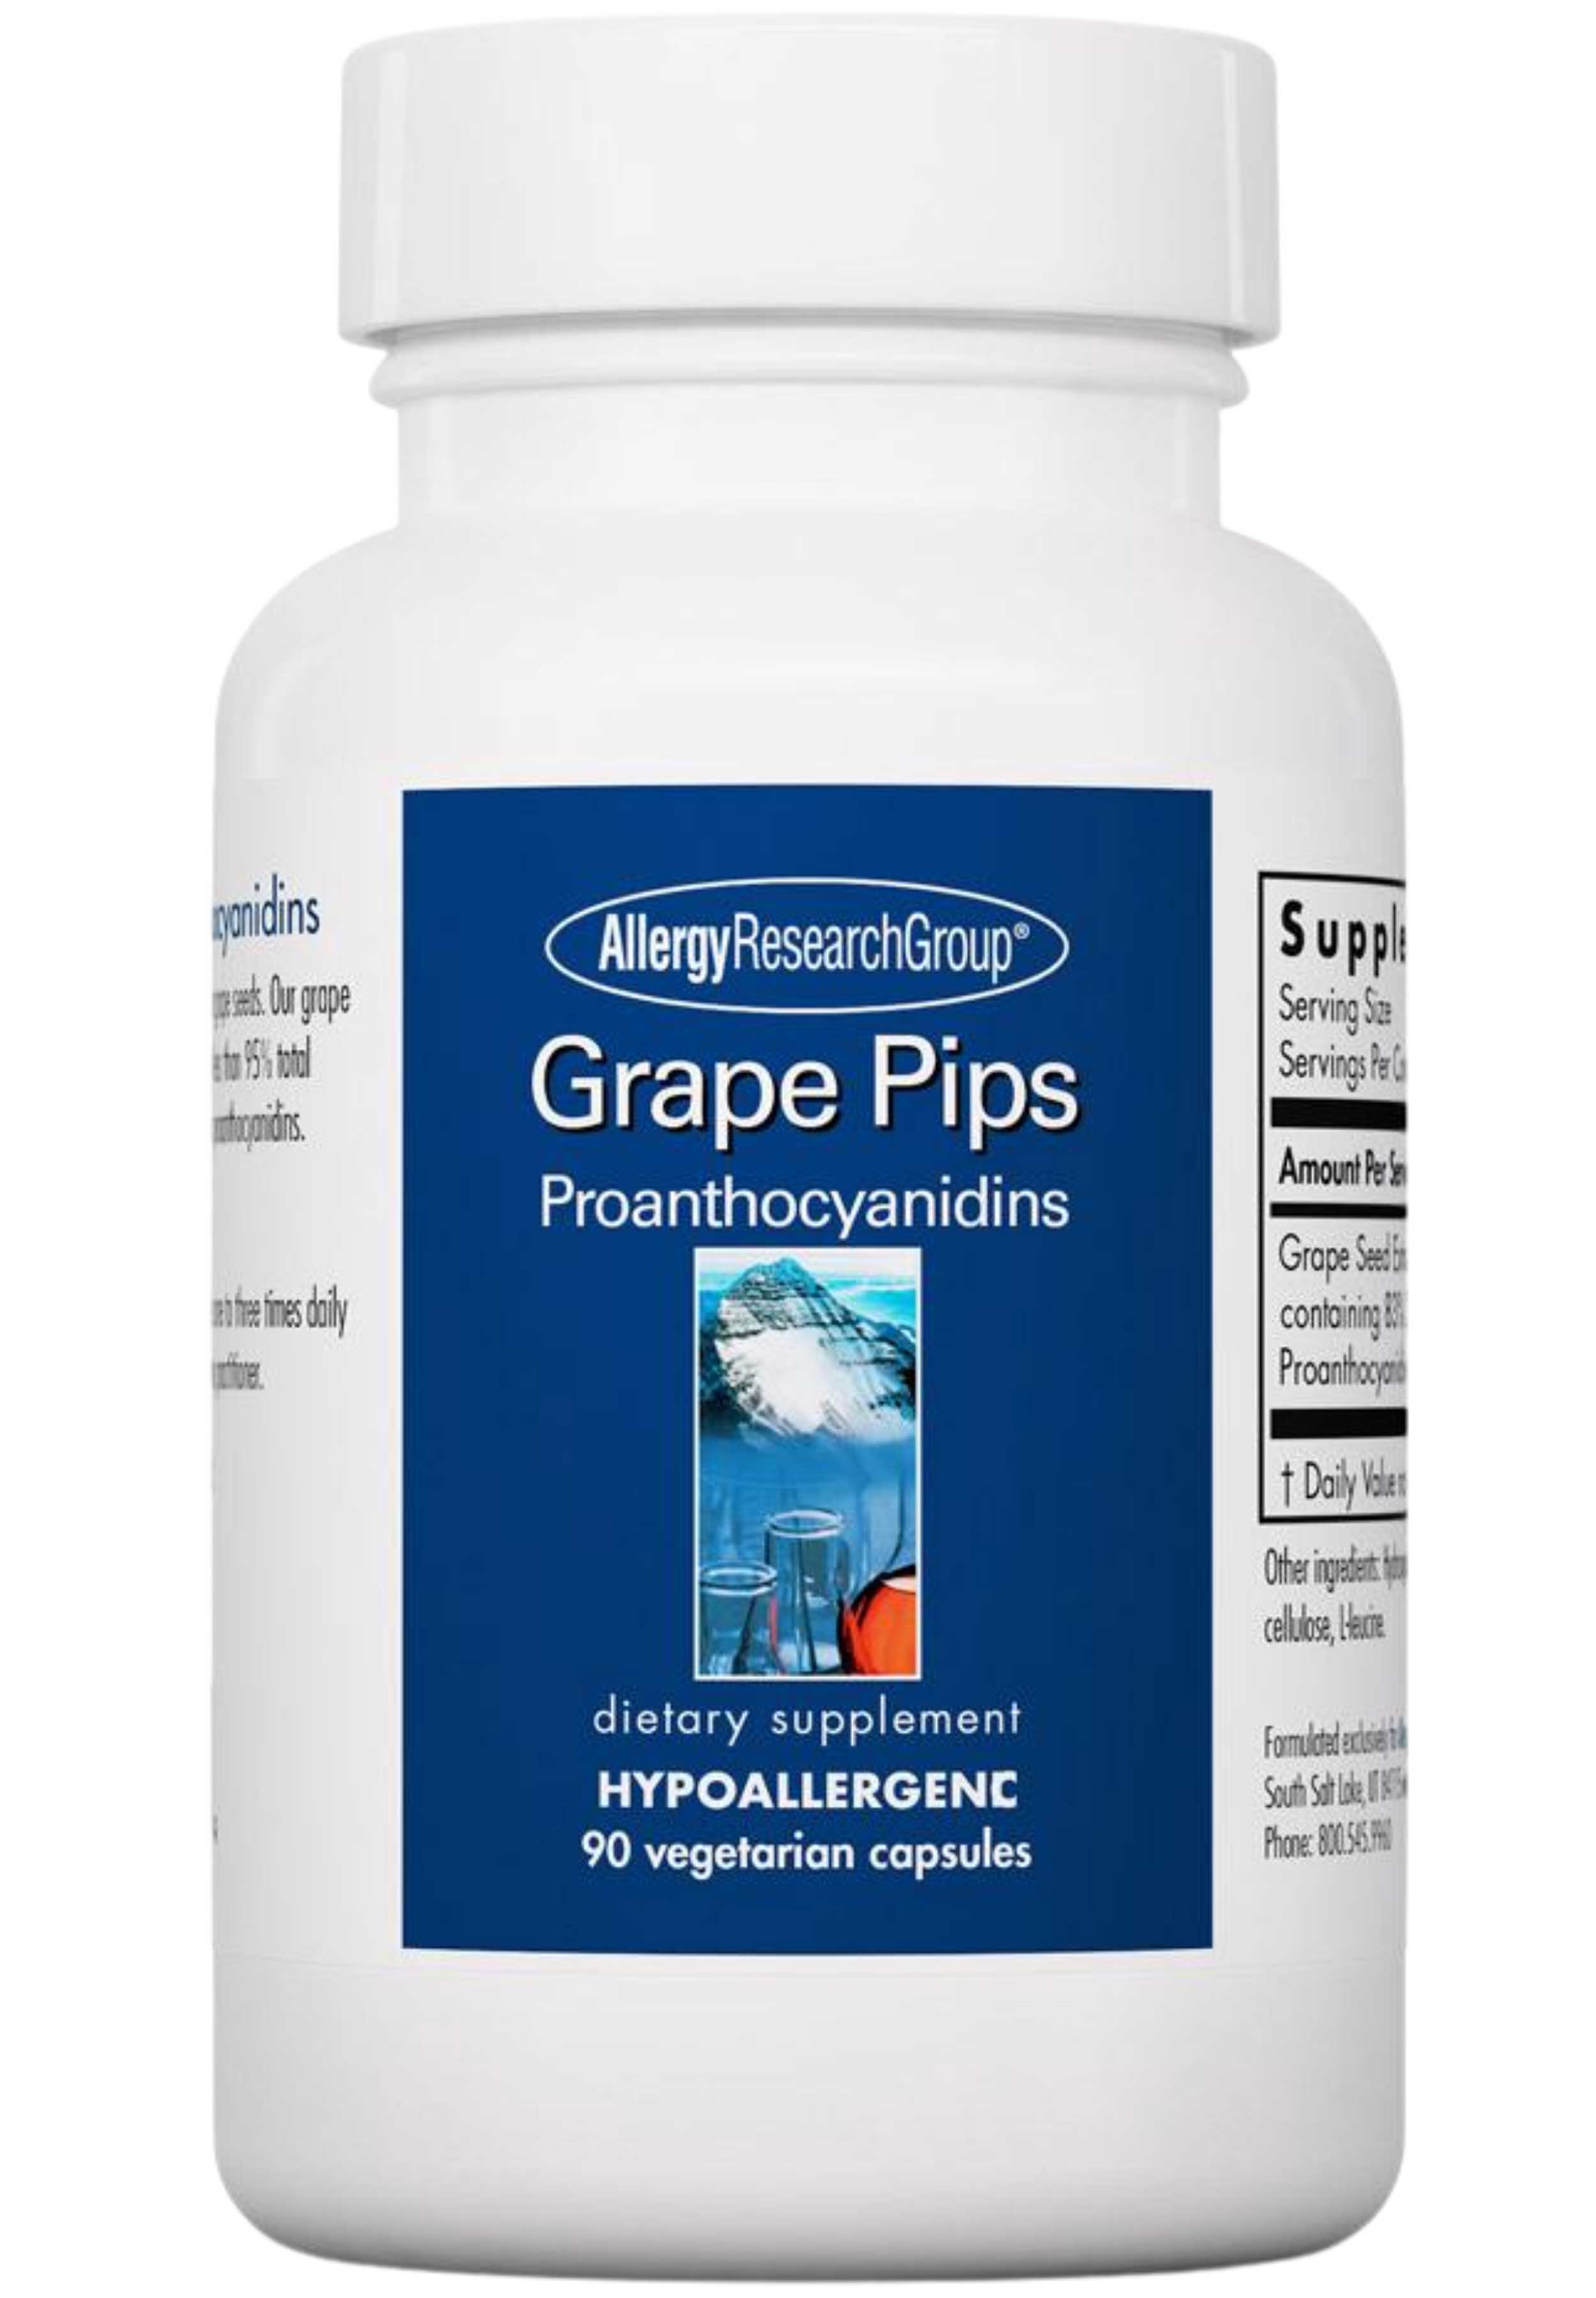 Allergy Research Group Grape Pips